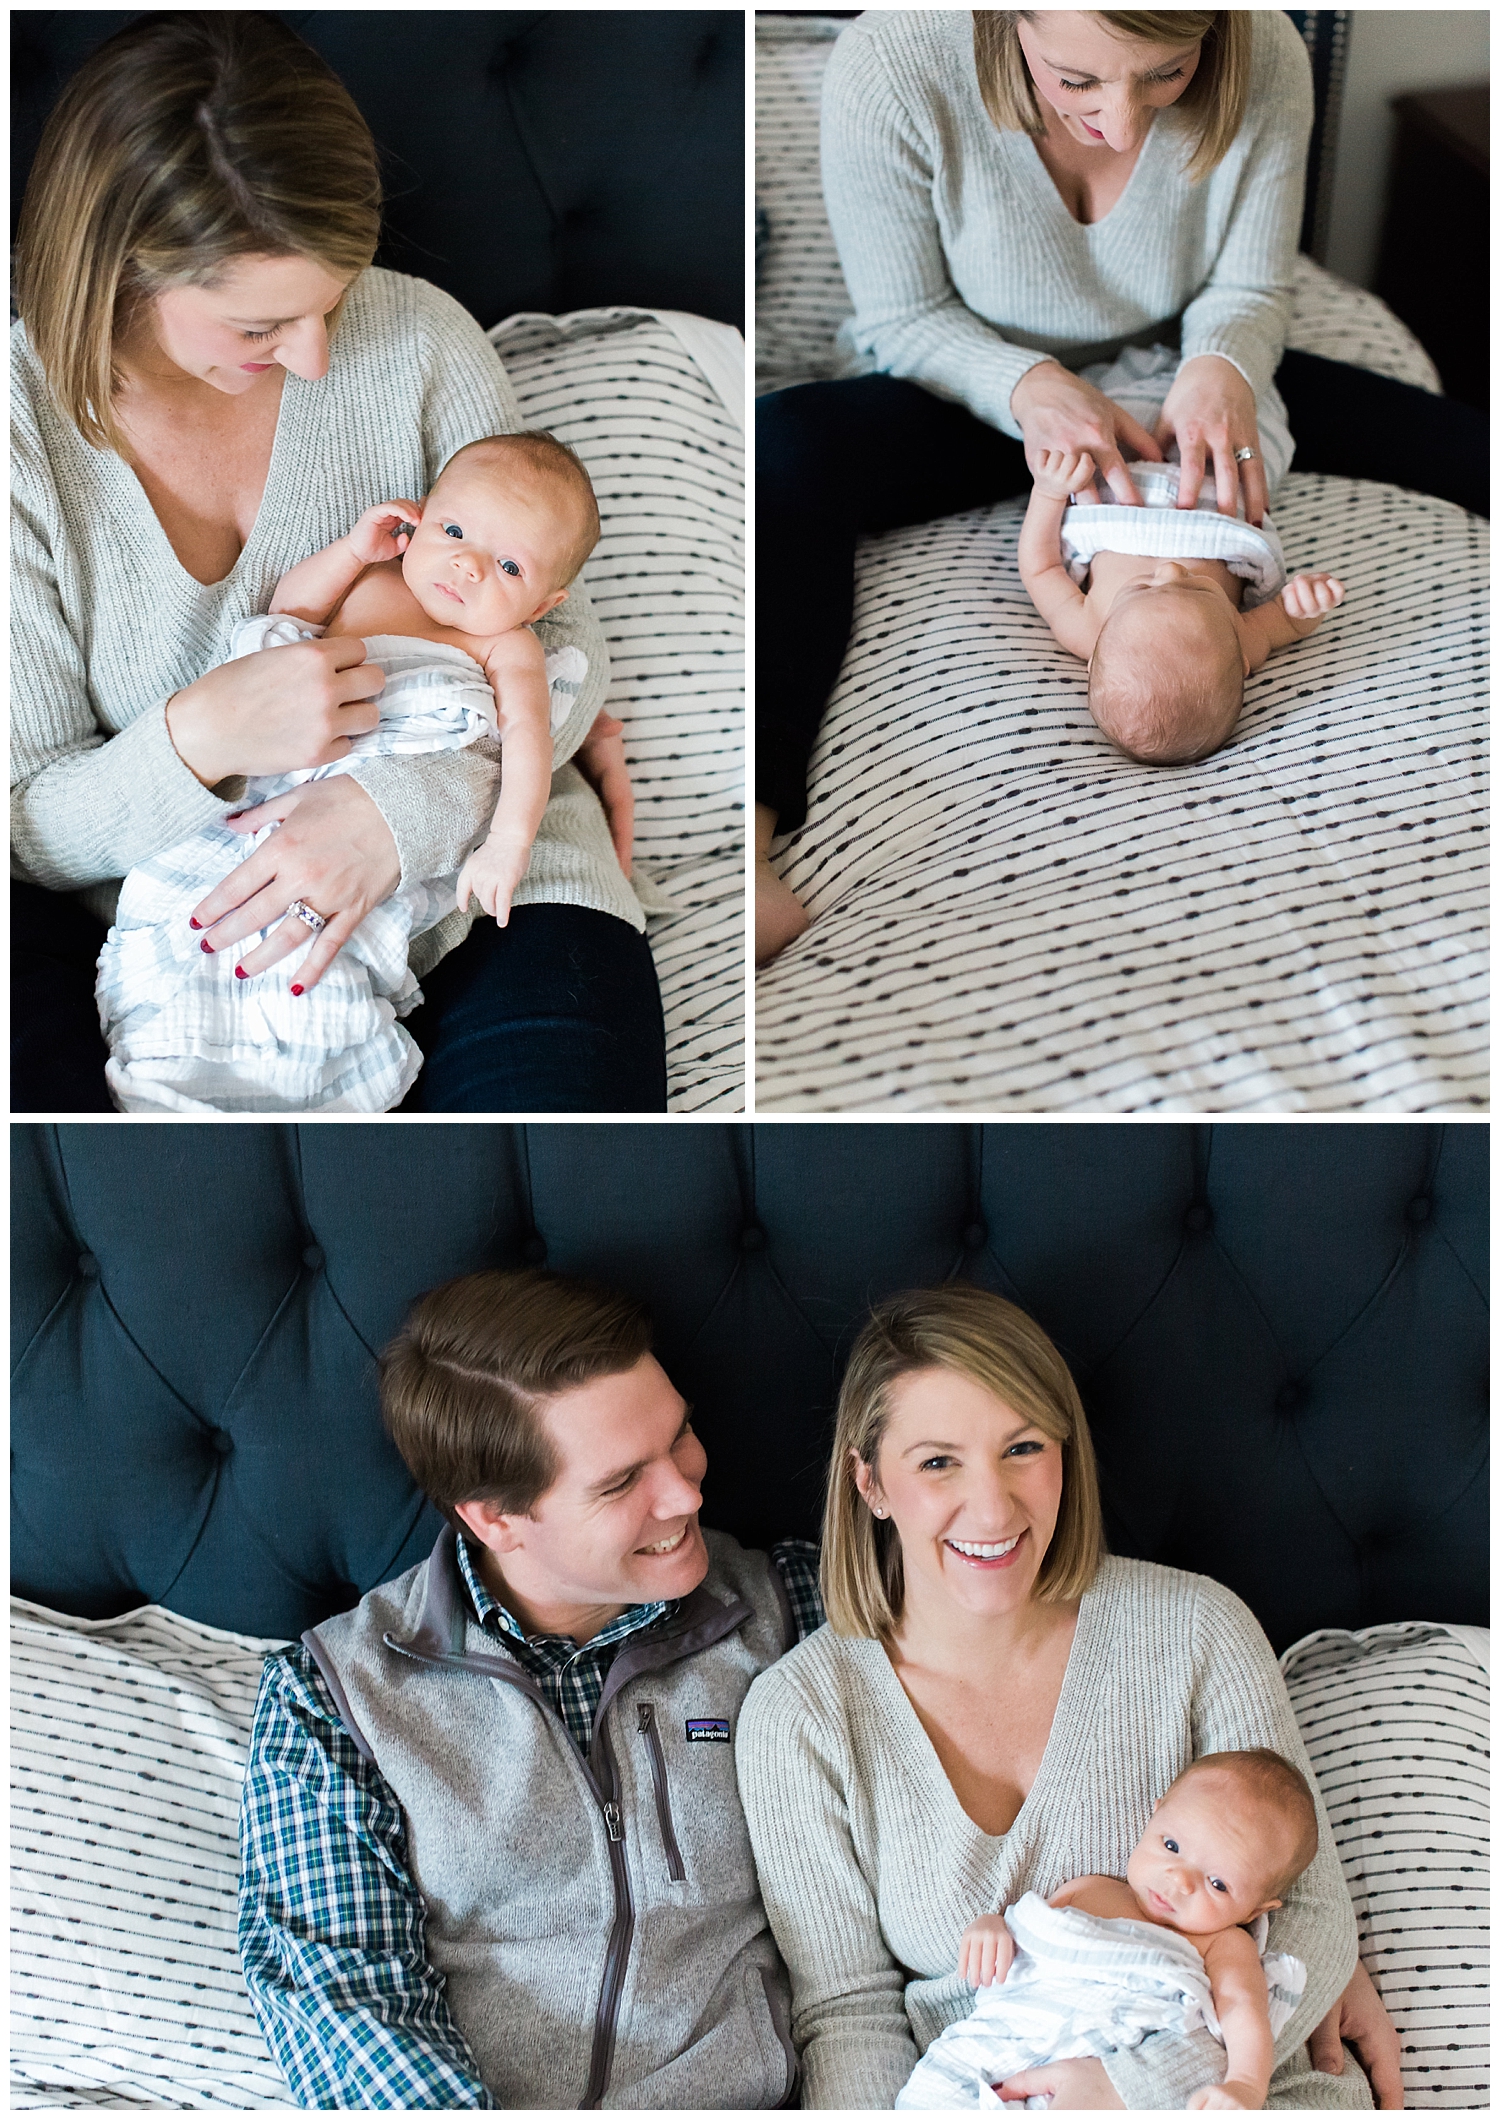 Swaddled baby with new mom and dad at a lifestyle newborn session in Duxbury, MA, with Halie Olszowy.